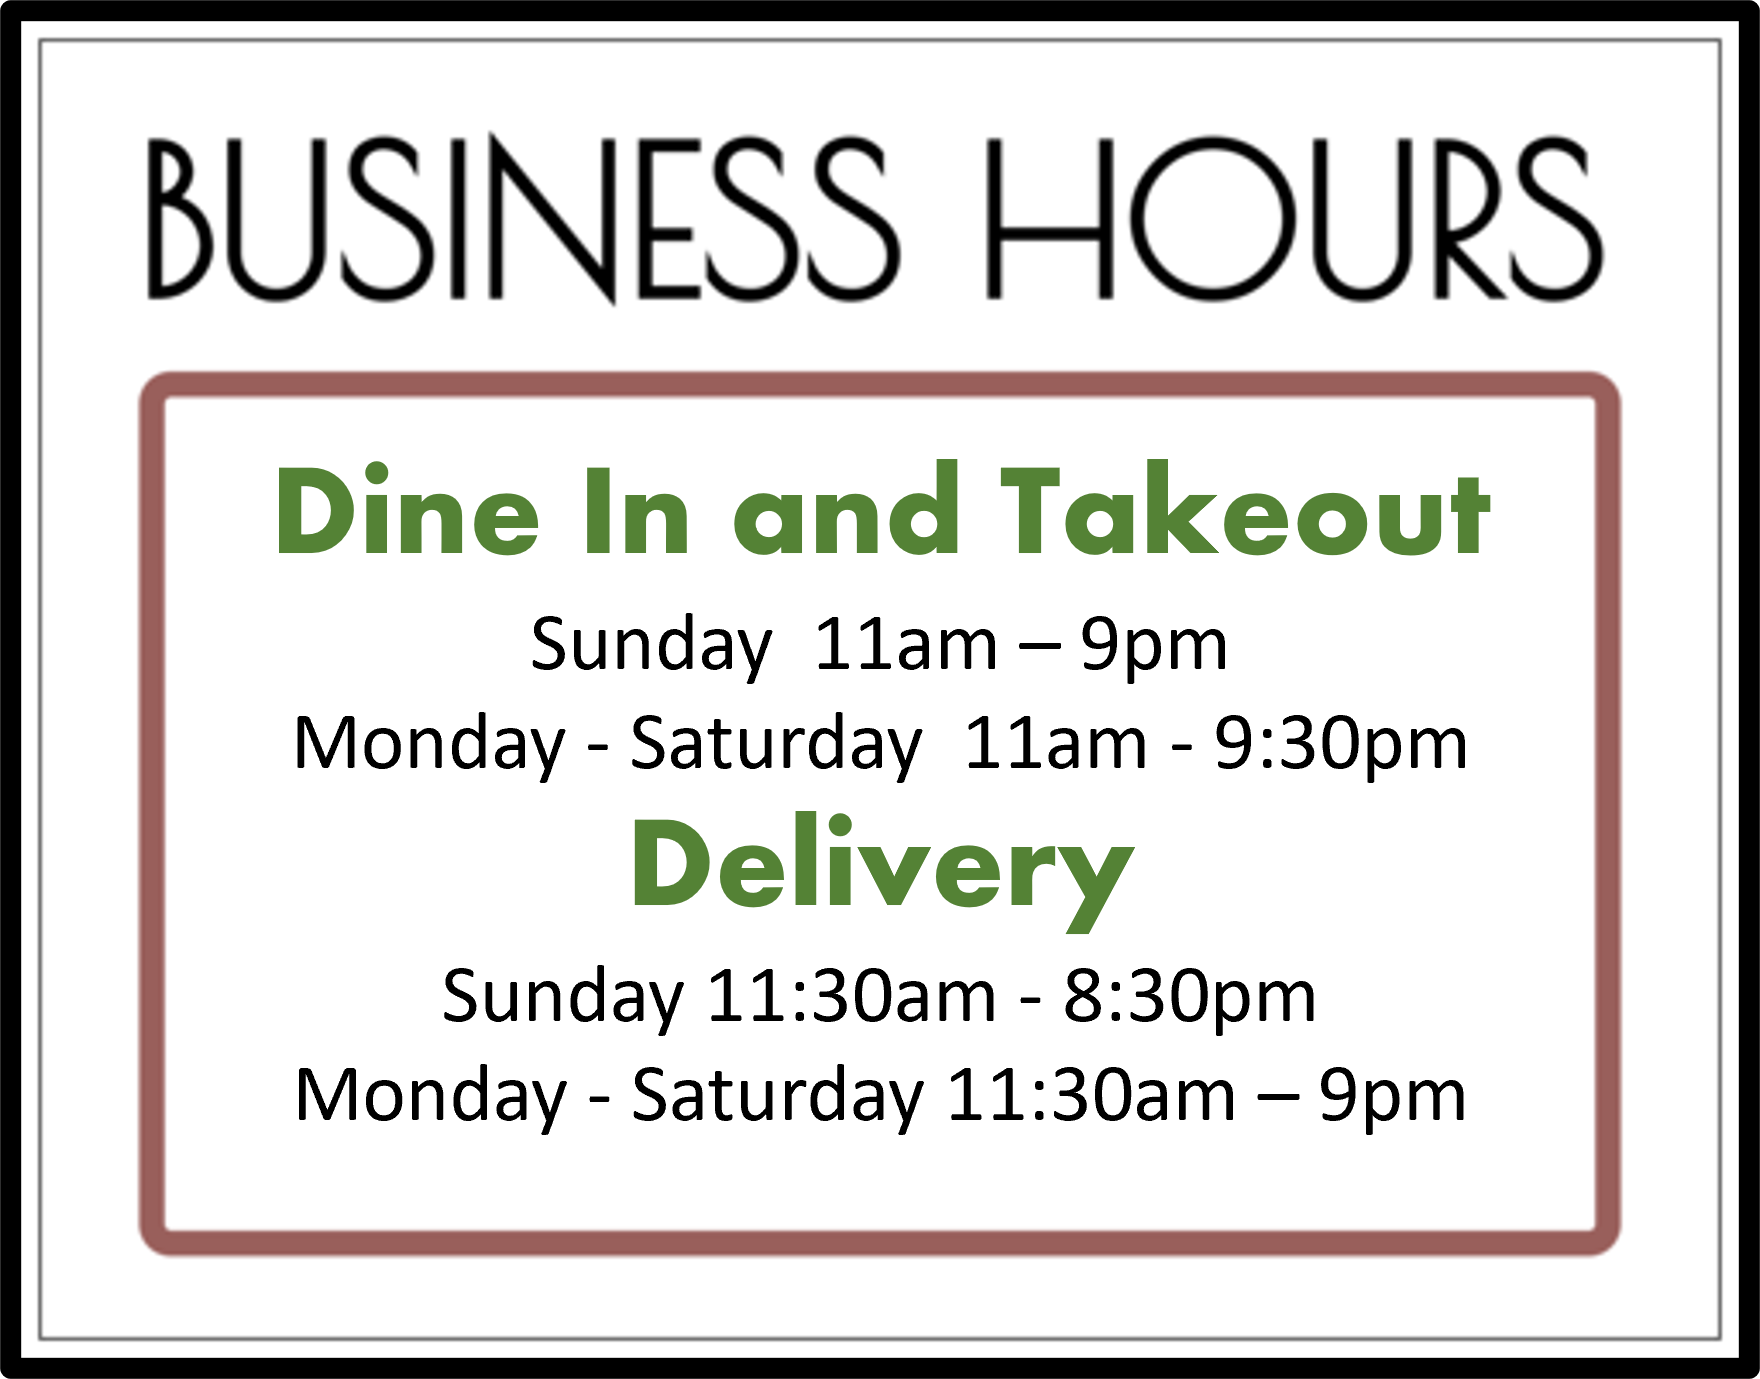 pizza express business hours